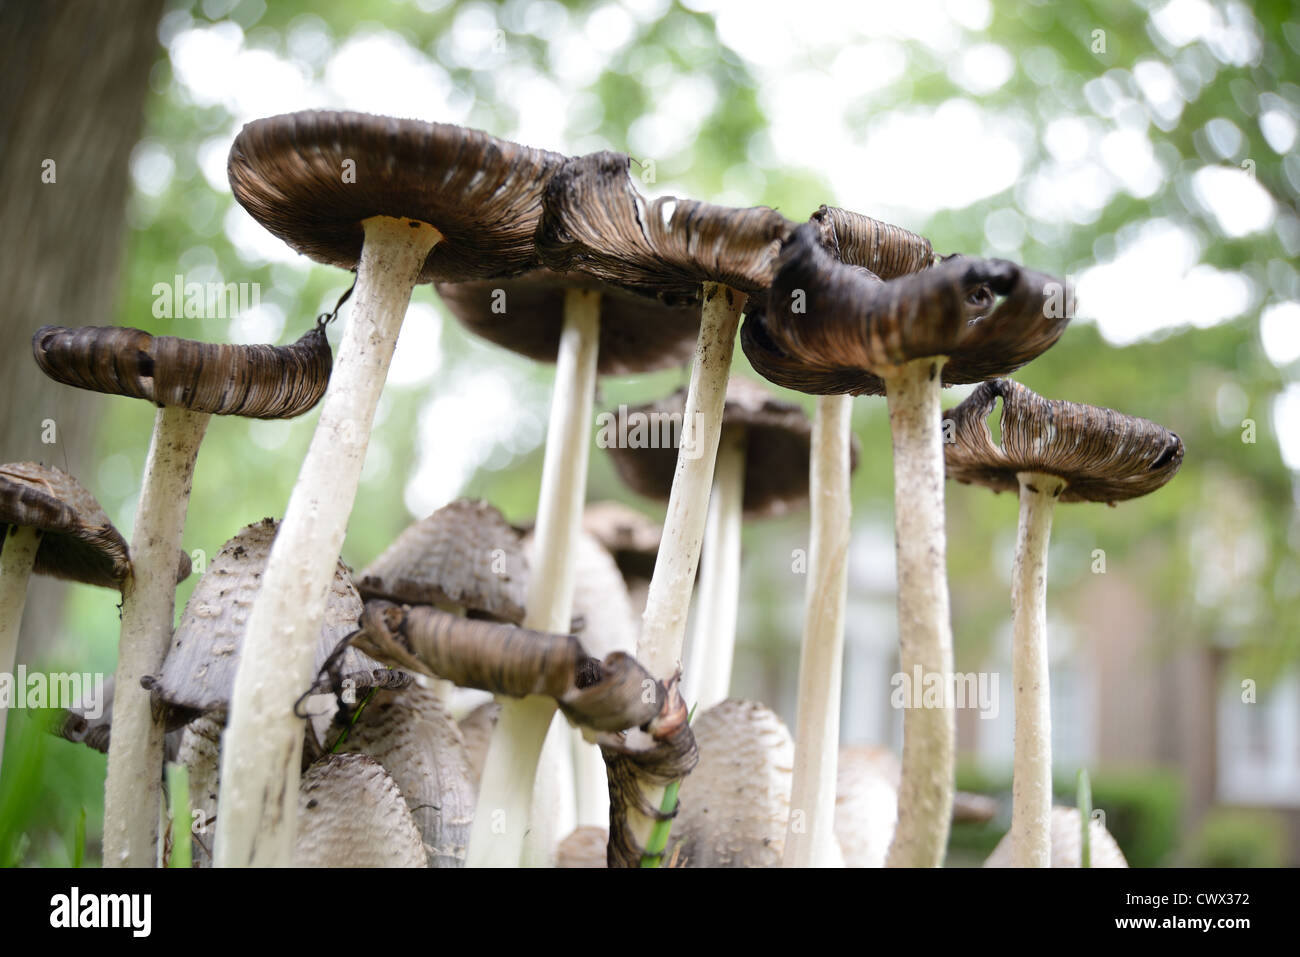 Photograph taken at a low-angle of a mushroom forest. Stock Photo